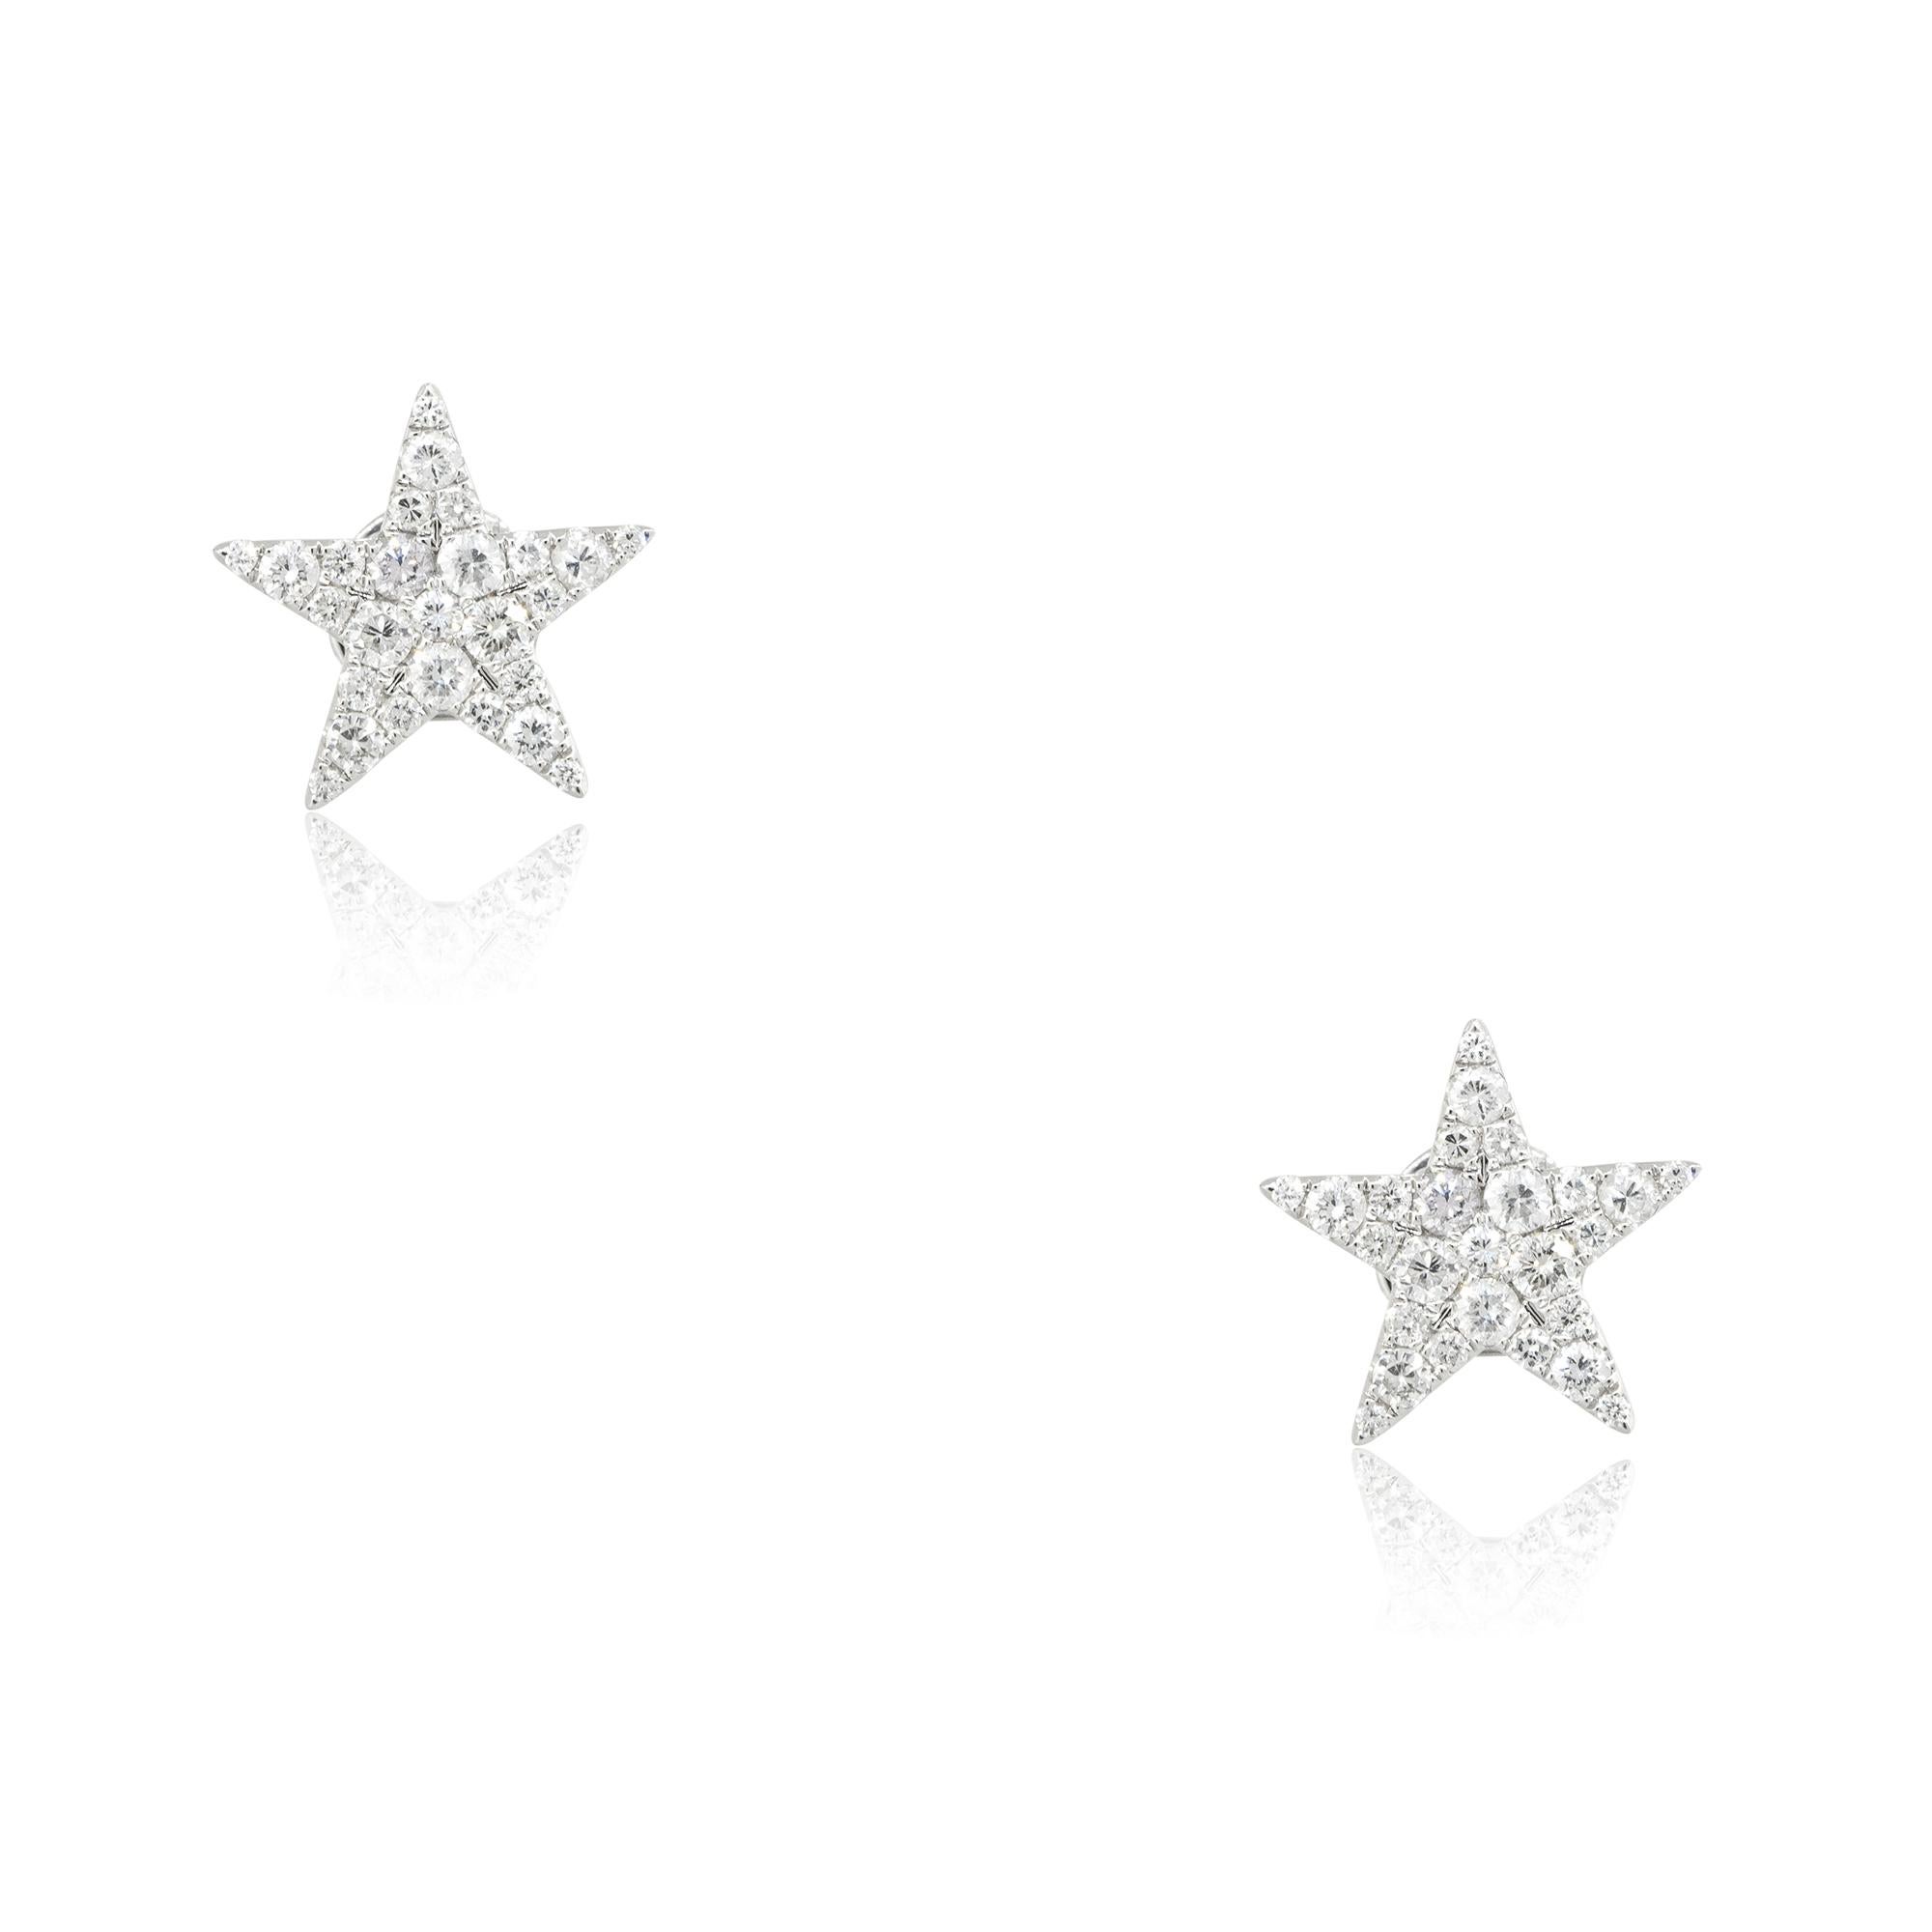 18k White Gold 0.76ctw Pave Diamond Star Stud Earrings
Material: 18k White Gold
Diamond Details: Approximately 0.76ctw of Pave set, Round Brilliant cut Diamonds. Diamonds are arranged in the shape of a star and there are 52 stones total
Earring